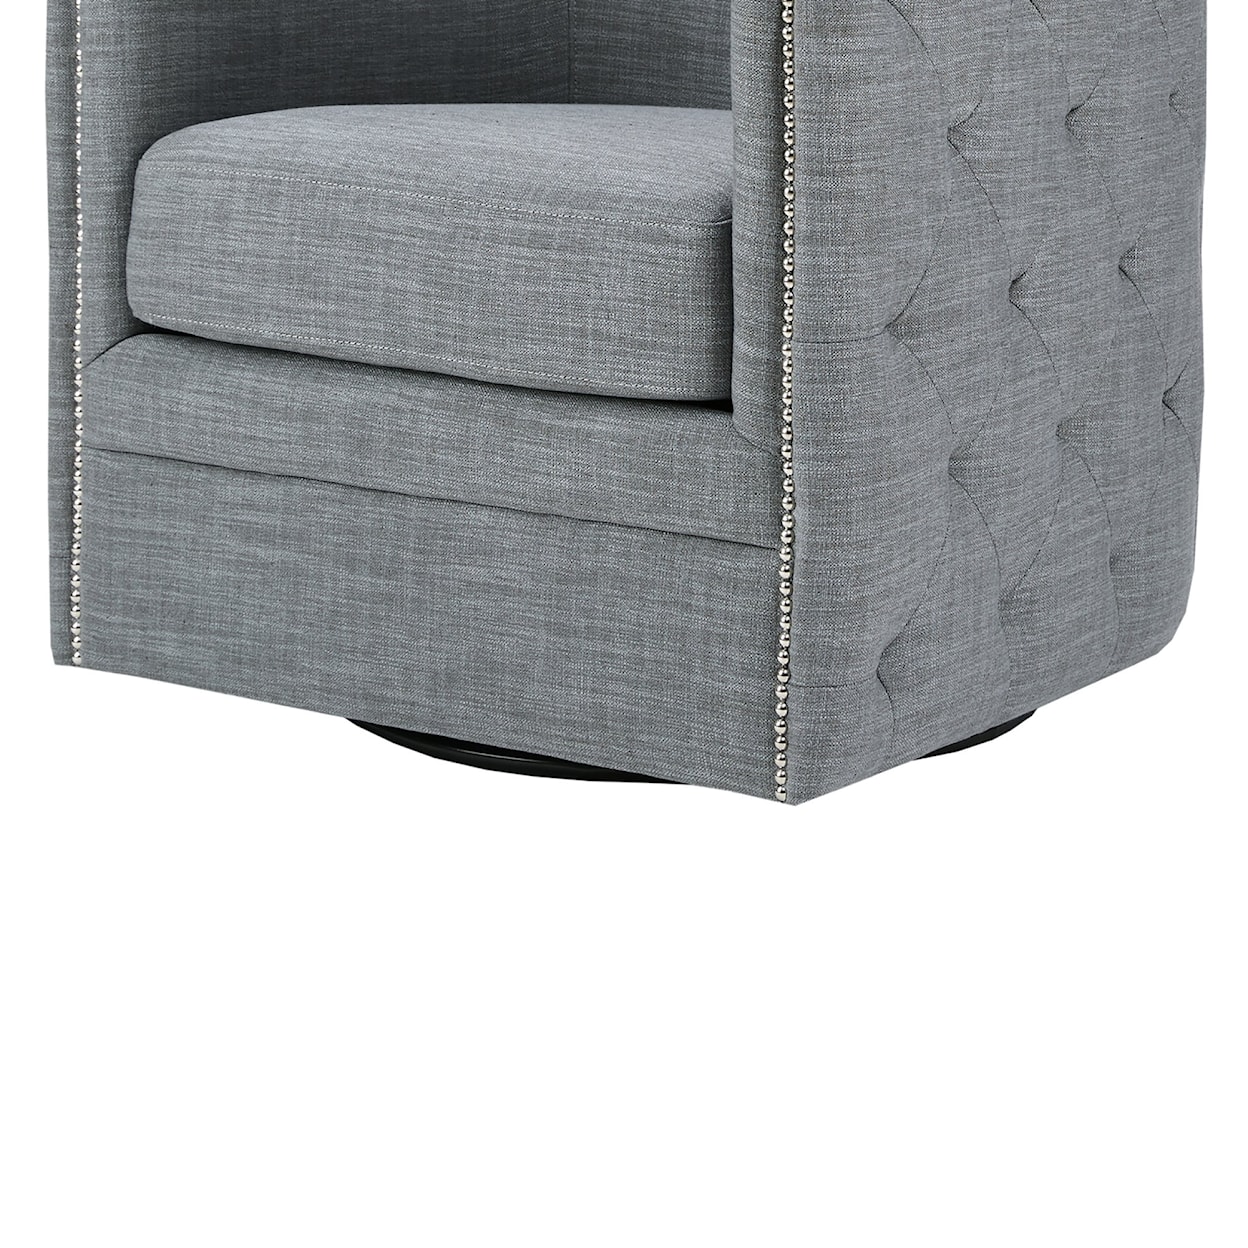 JLA Home Home Accents Tufted Swivel Chair